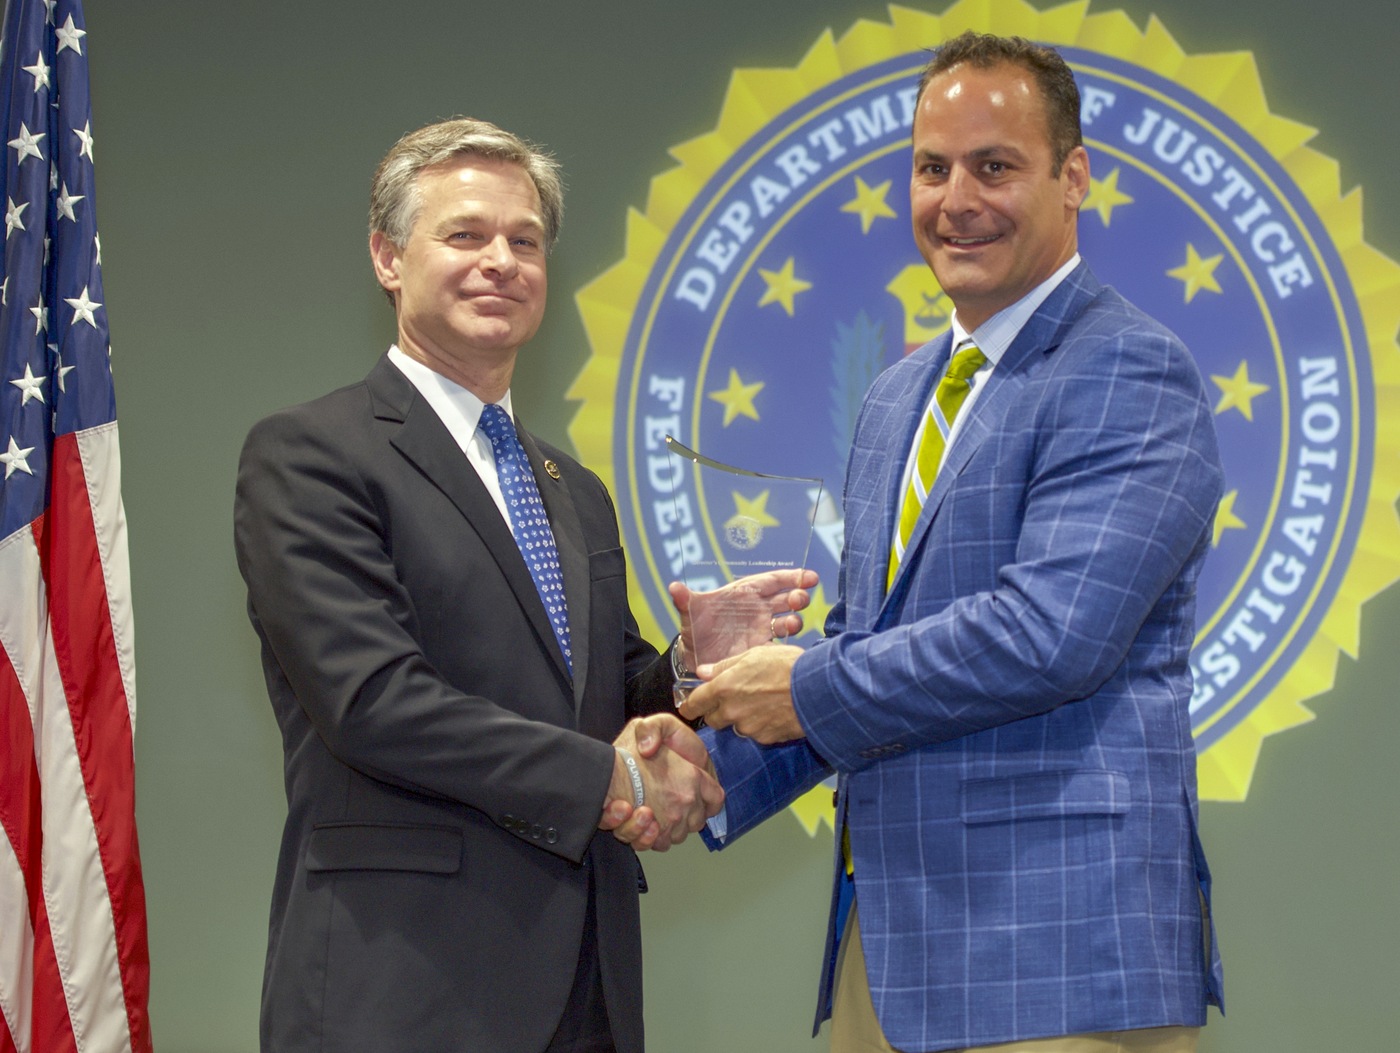 FBI Director Christopher Wray presents Criminal Justice Information Services (CJIS) Division recipient Mark Urso with the Director’s Community Leadership Award (DCLA) at a ceremony at FBI Headquarters on May 3, 2019.